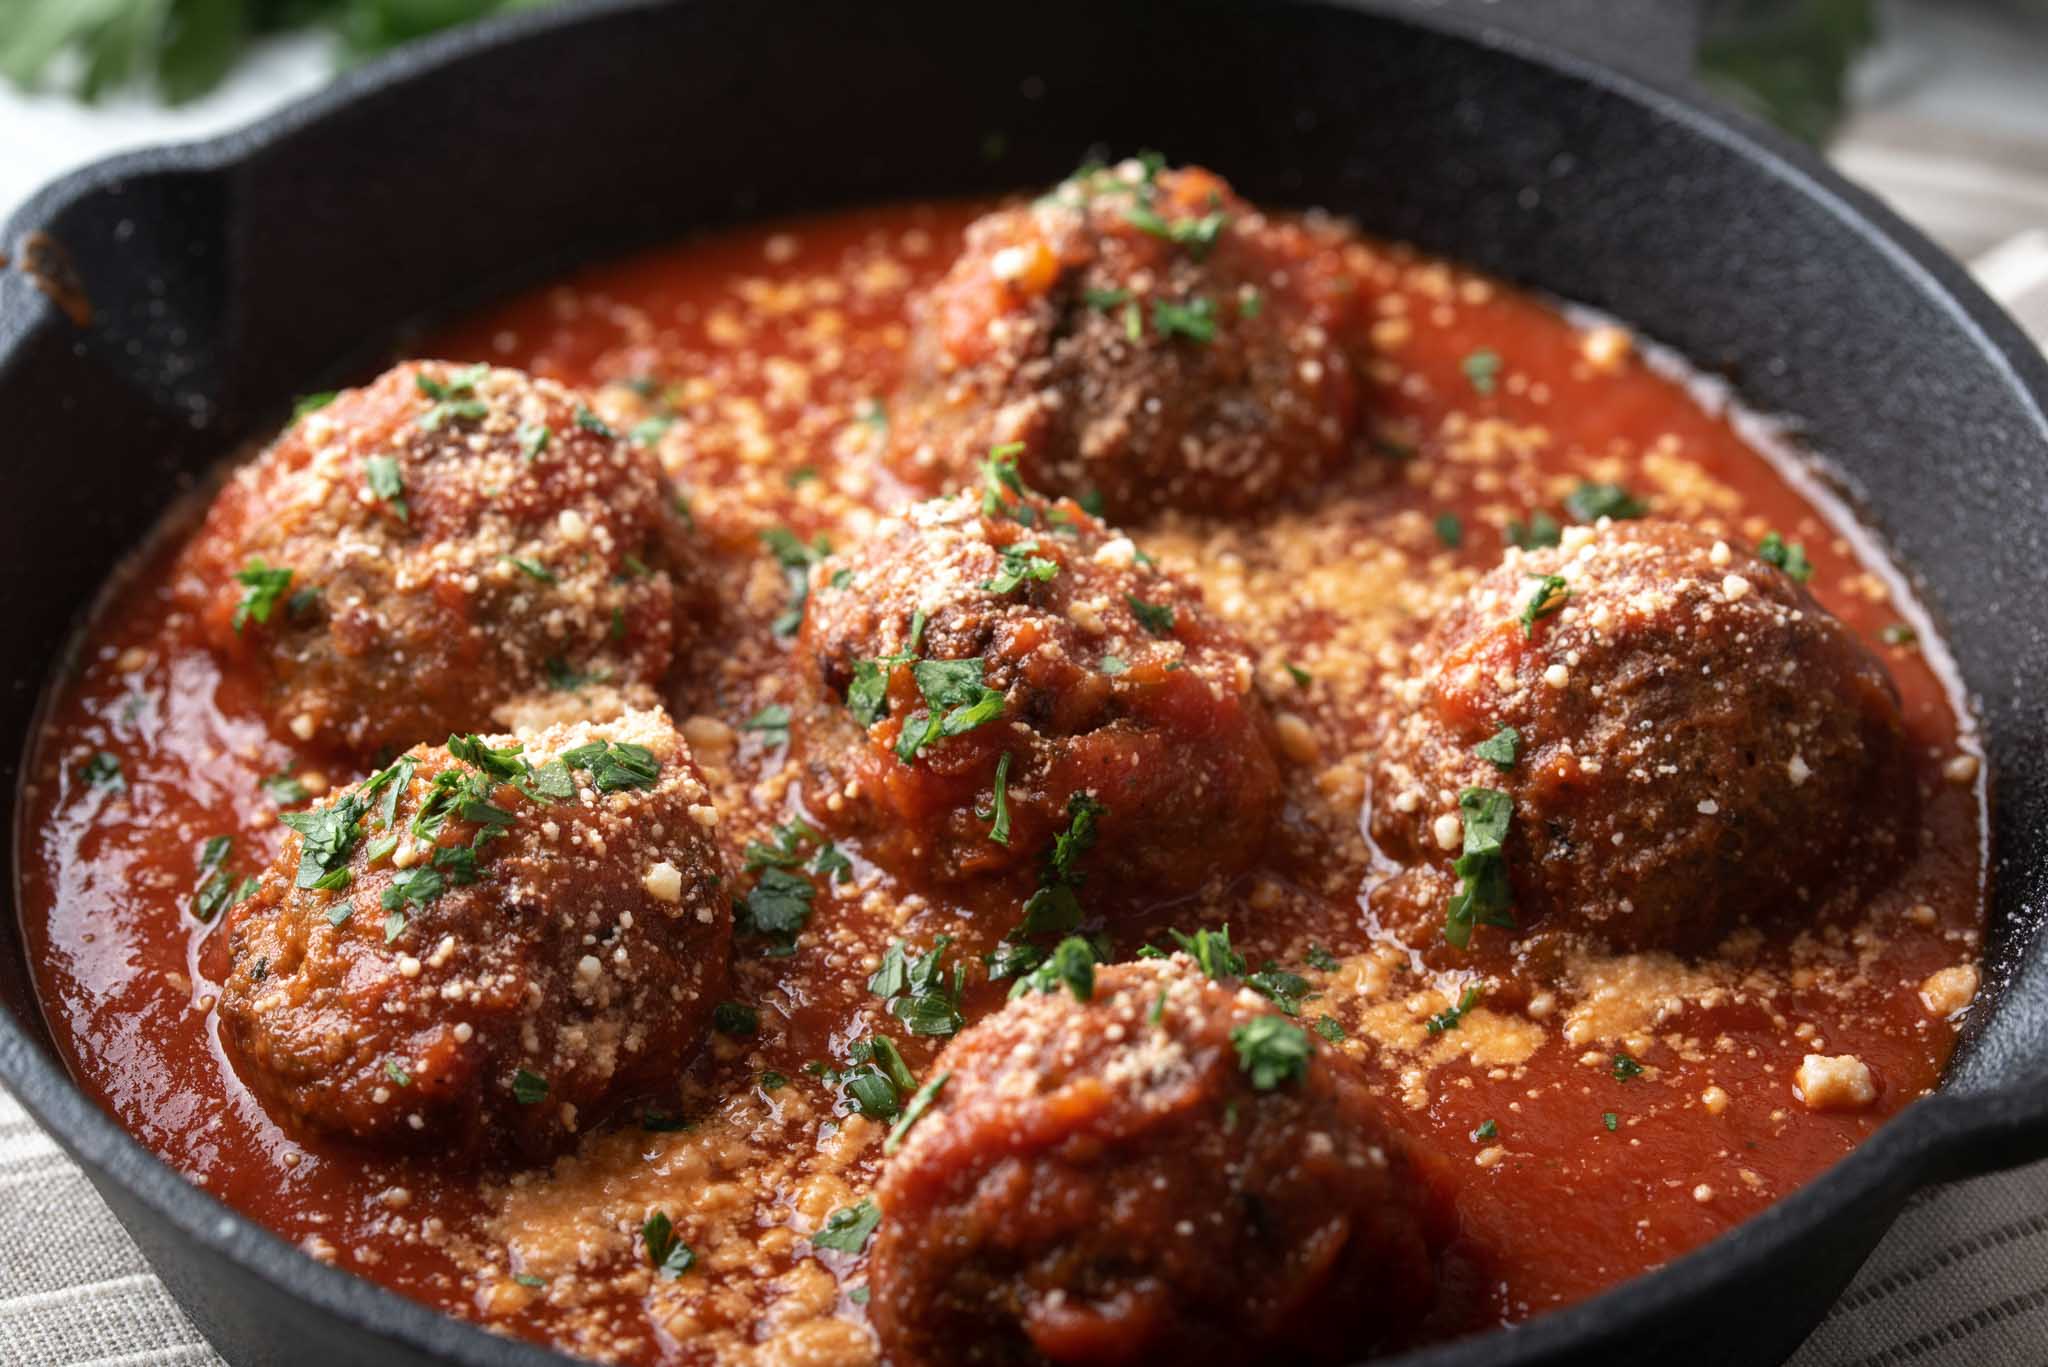 Fresh made meatballs with marina sauce at The Real Food Academy.